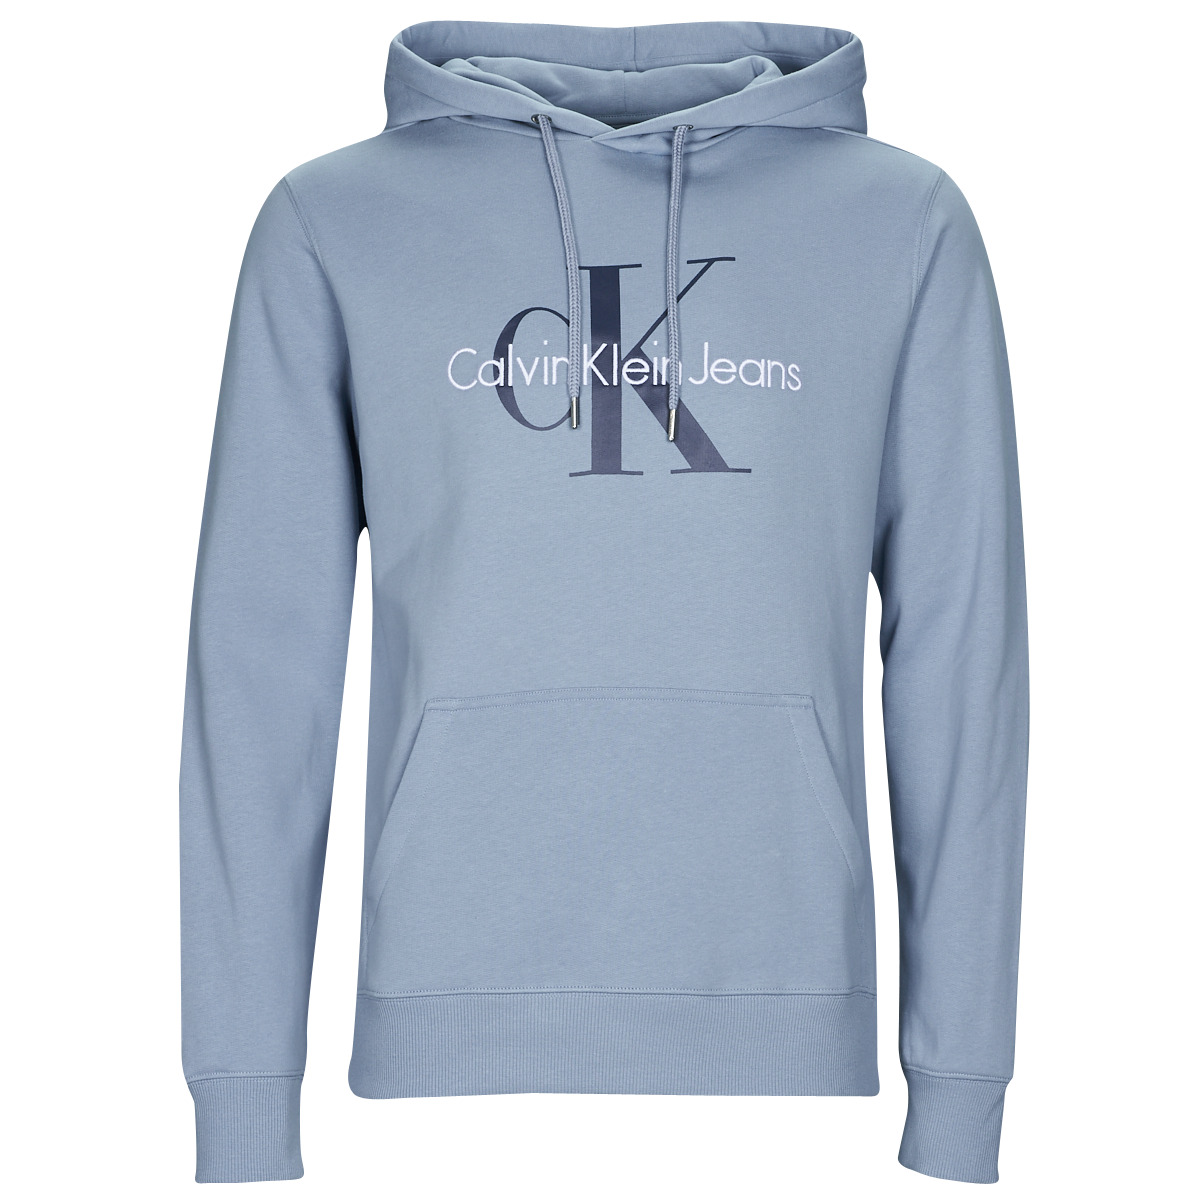 Calvin Klein Jeans MONOLOGO REGULAR HOODIE delivery Men Blue Free Clothing | Spartoo - NET - sweaters 